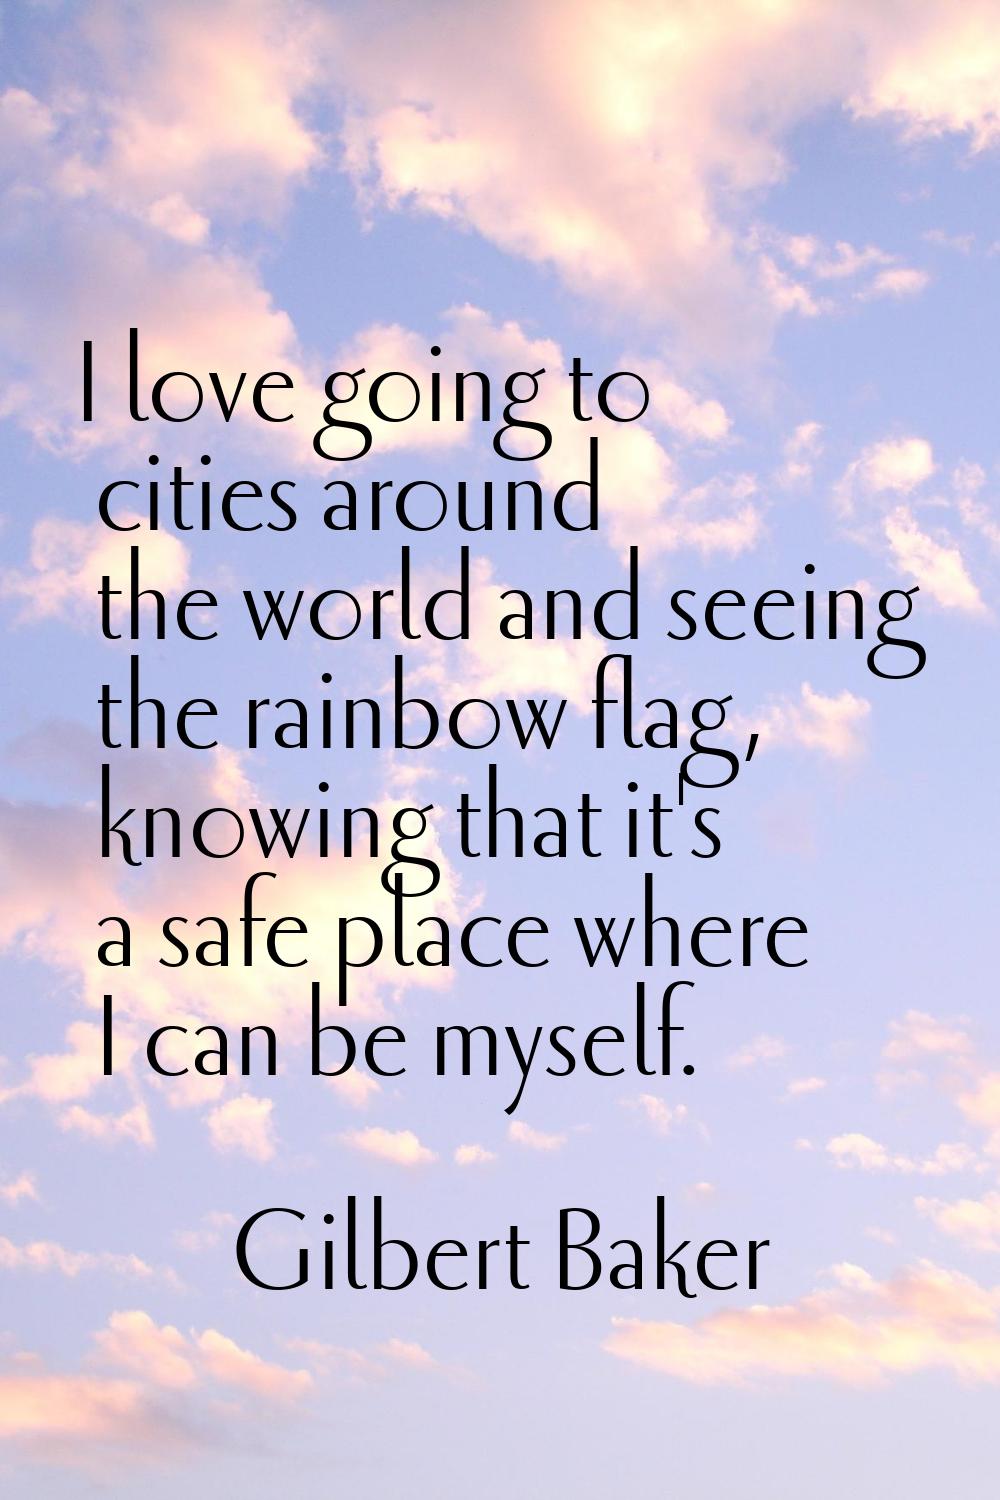 I love going to cities around the world and seeing the rainbow flag, knowing that it's a safe place